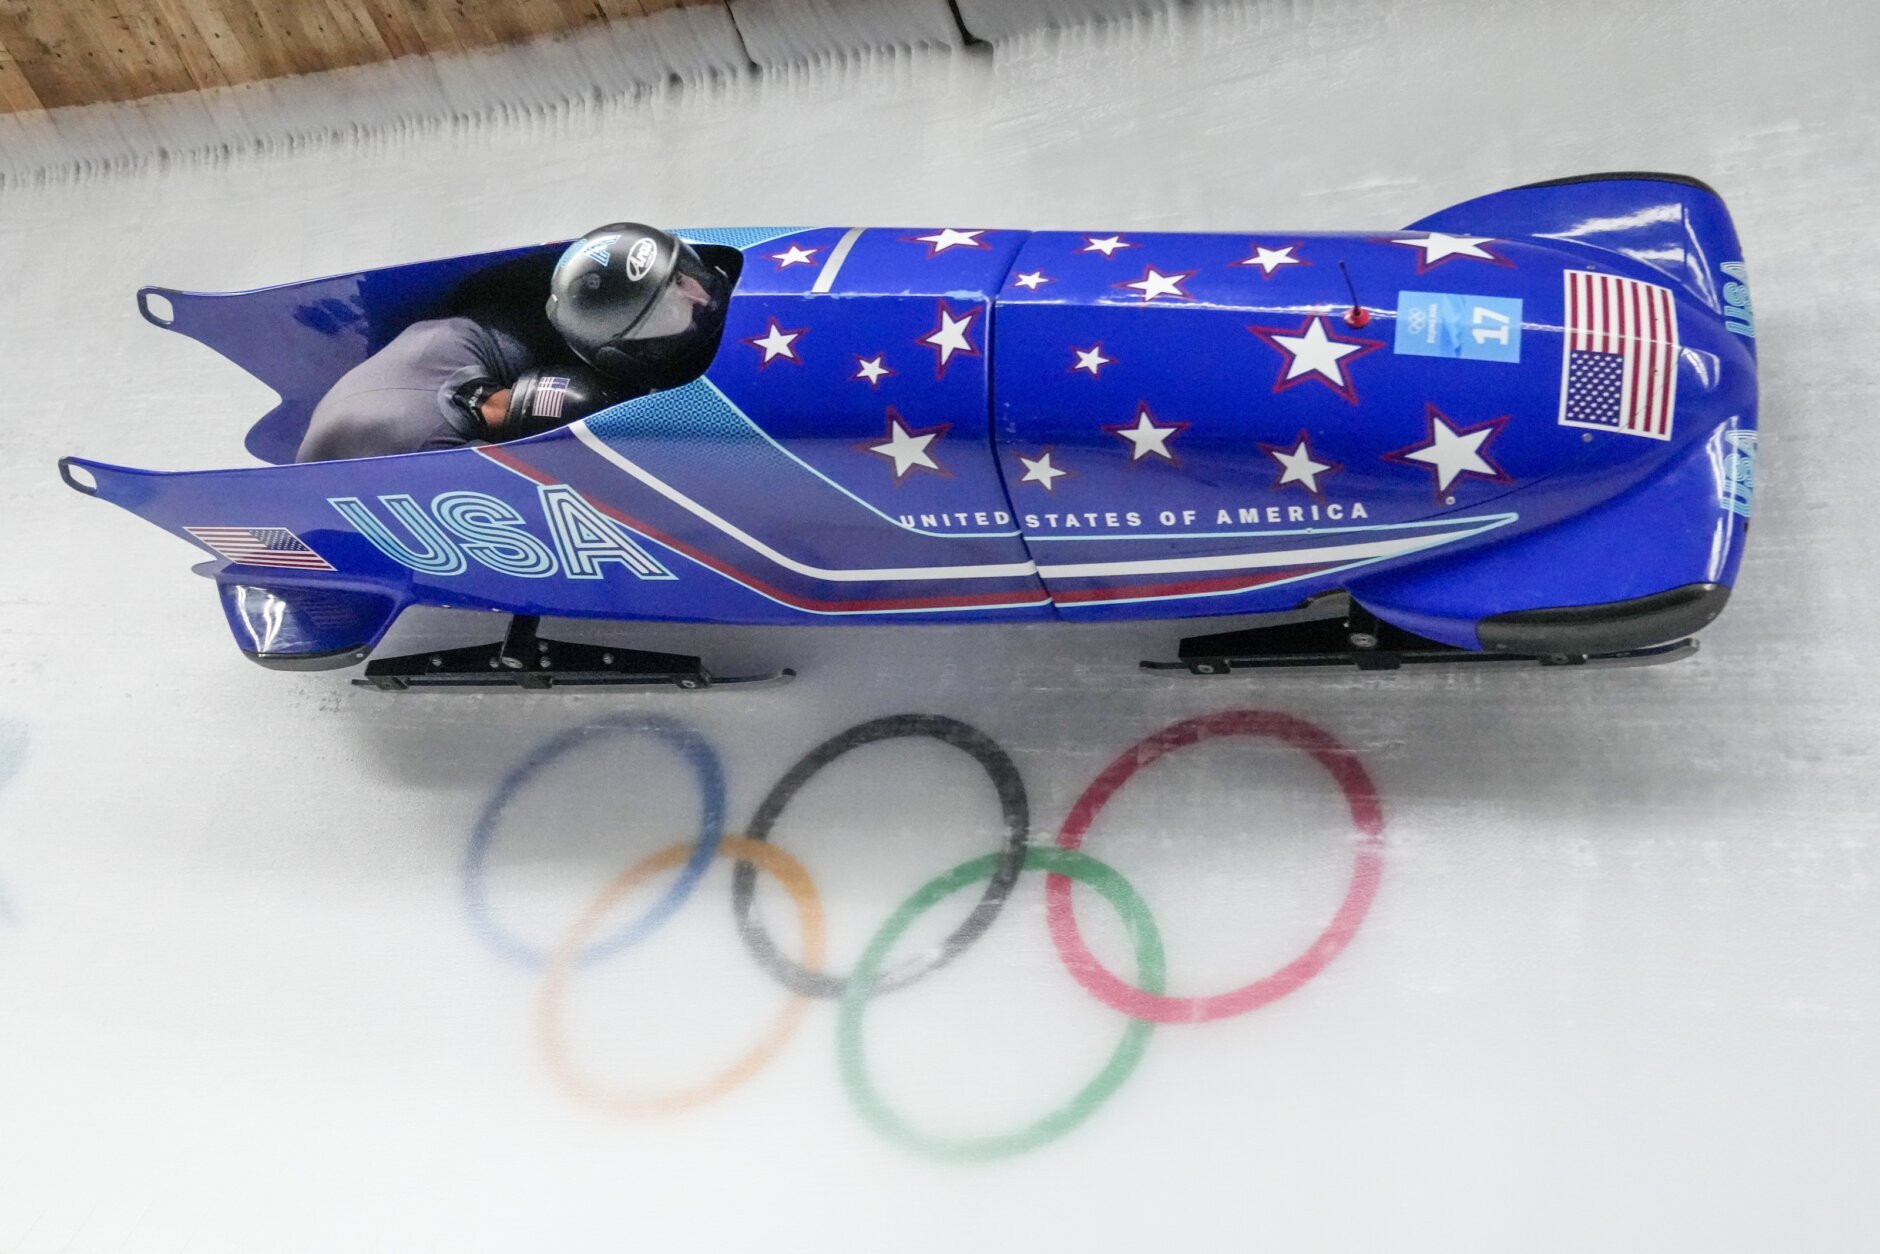 <p>Frank Delduca and Hakeem Abdul-Saboor, of United States, slide during the 2-man heat 1 at the 2022 Winter Olympics, Monday, Feb. 14, 2022, in the Yanqing district of Beijing.</p>
